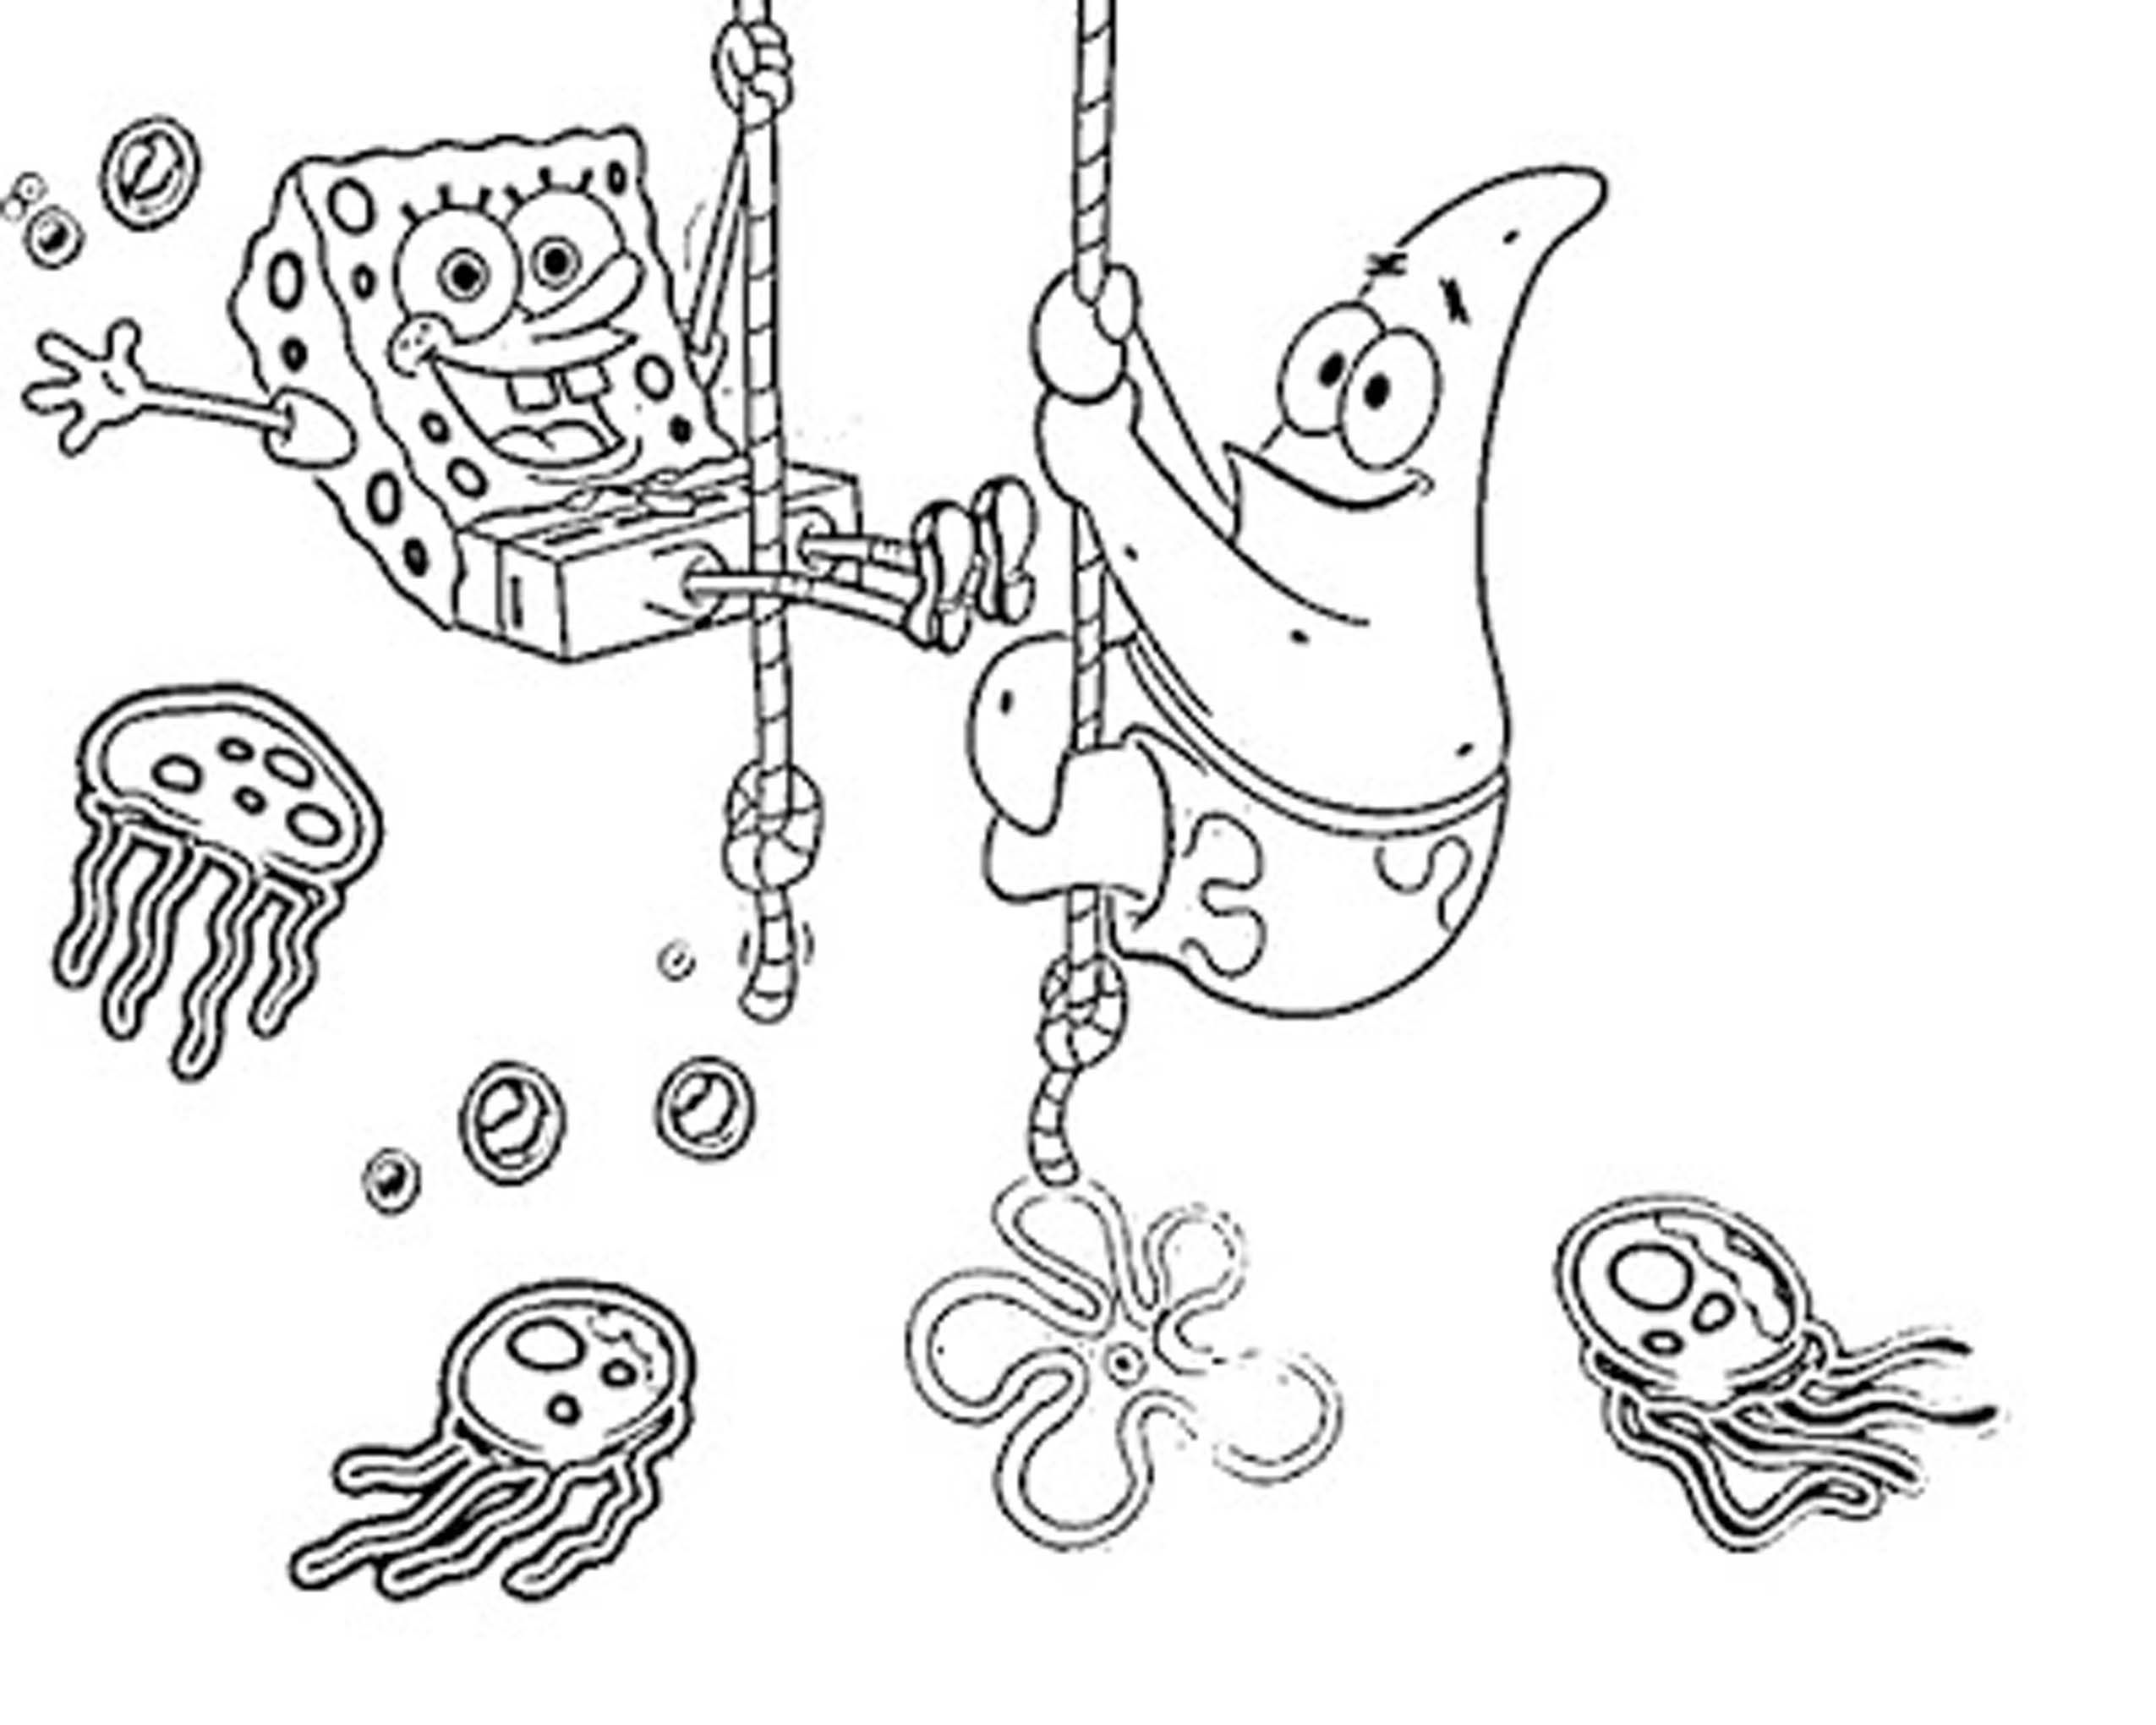 spongebob coloring pages for kids - Printable Kids Colouring Pages